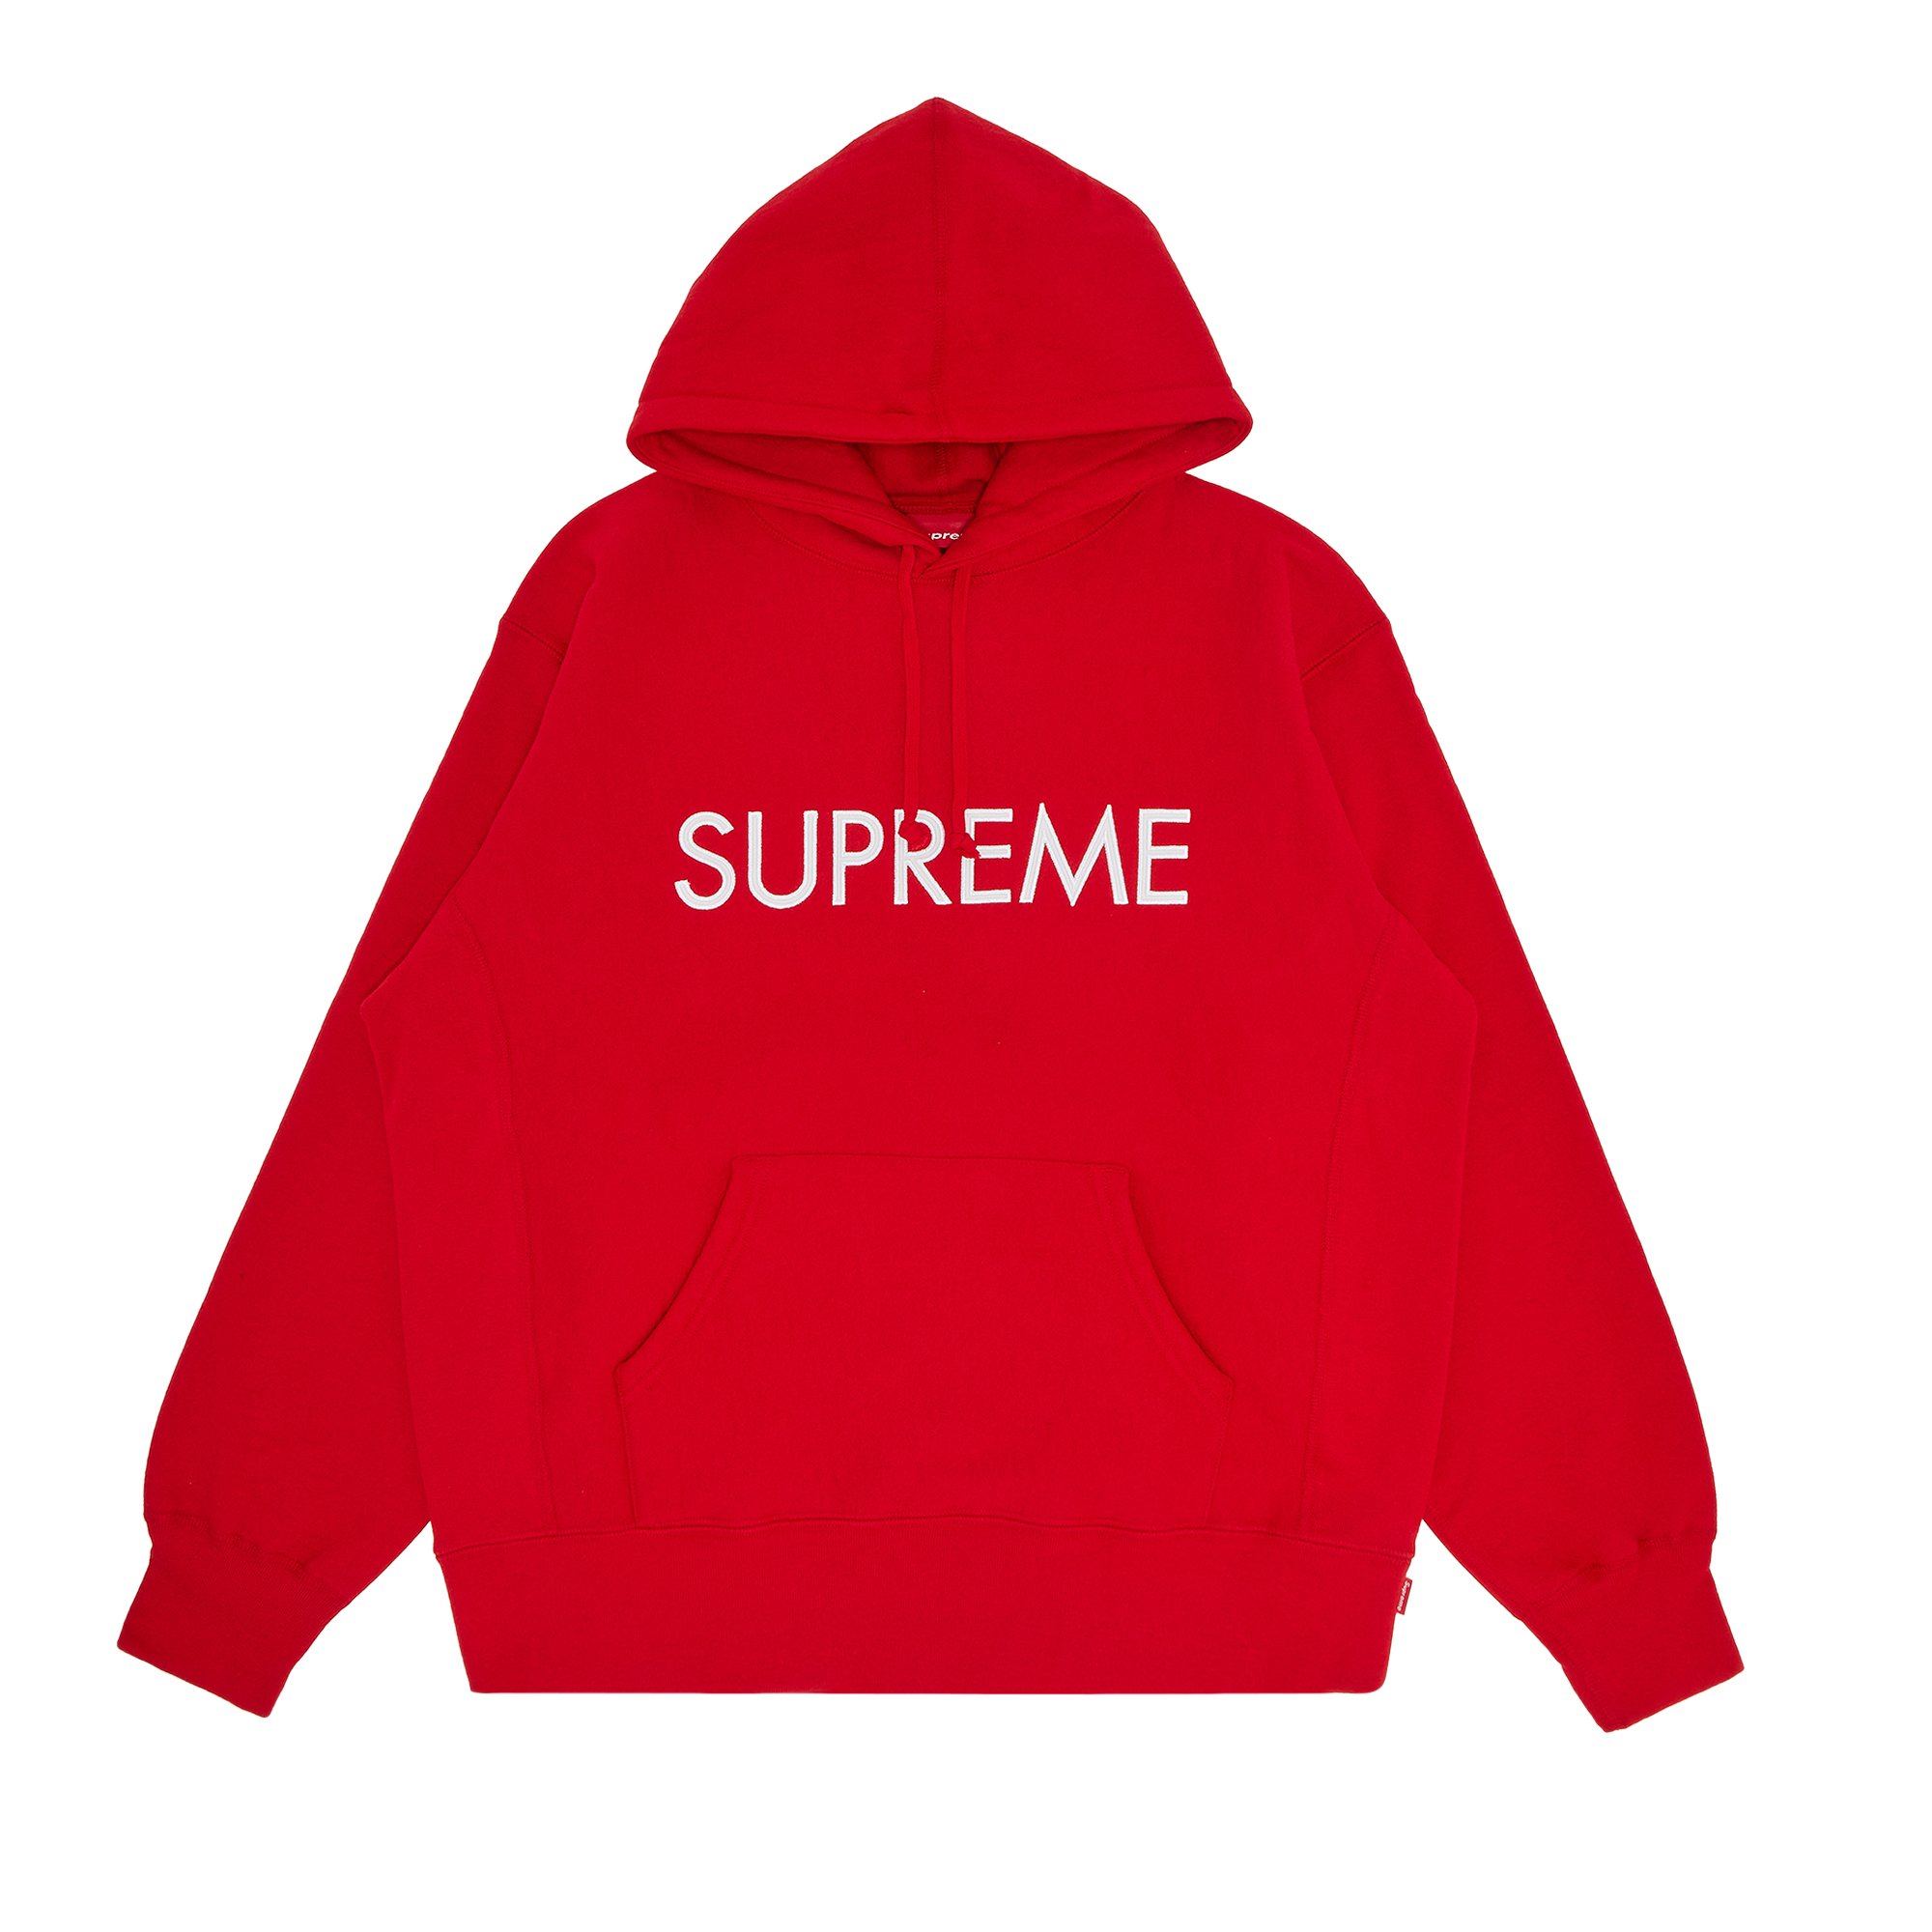 Buy Supreme Capital Hooded Sweatshirt 'Red' - FW22SW69 RED | GOAT